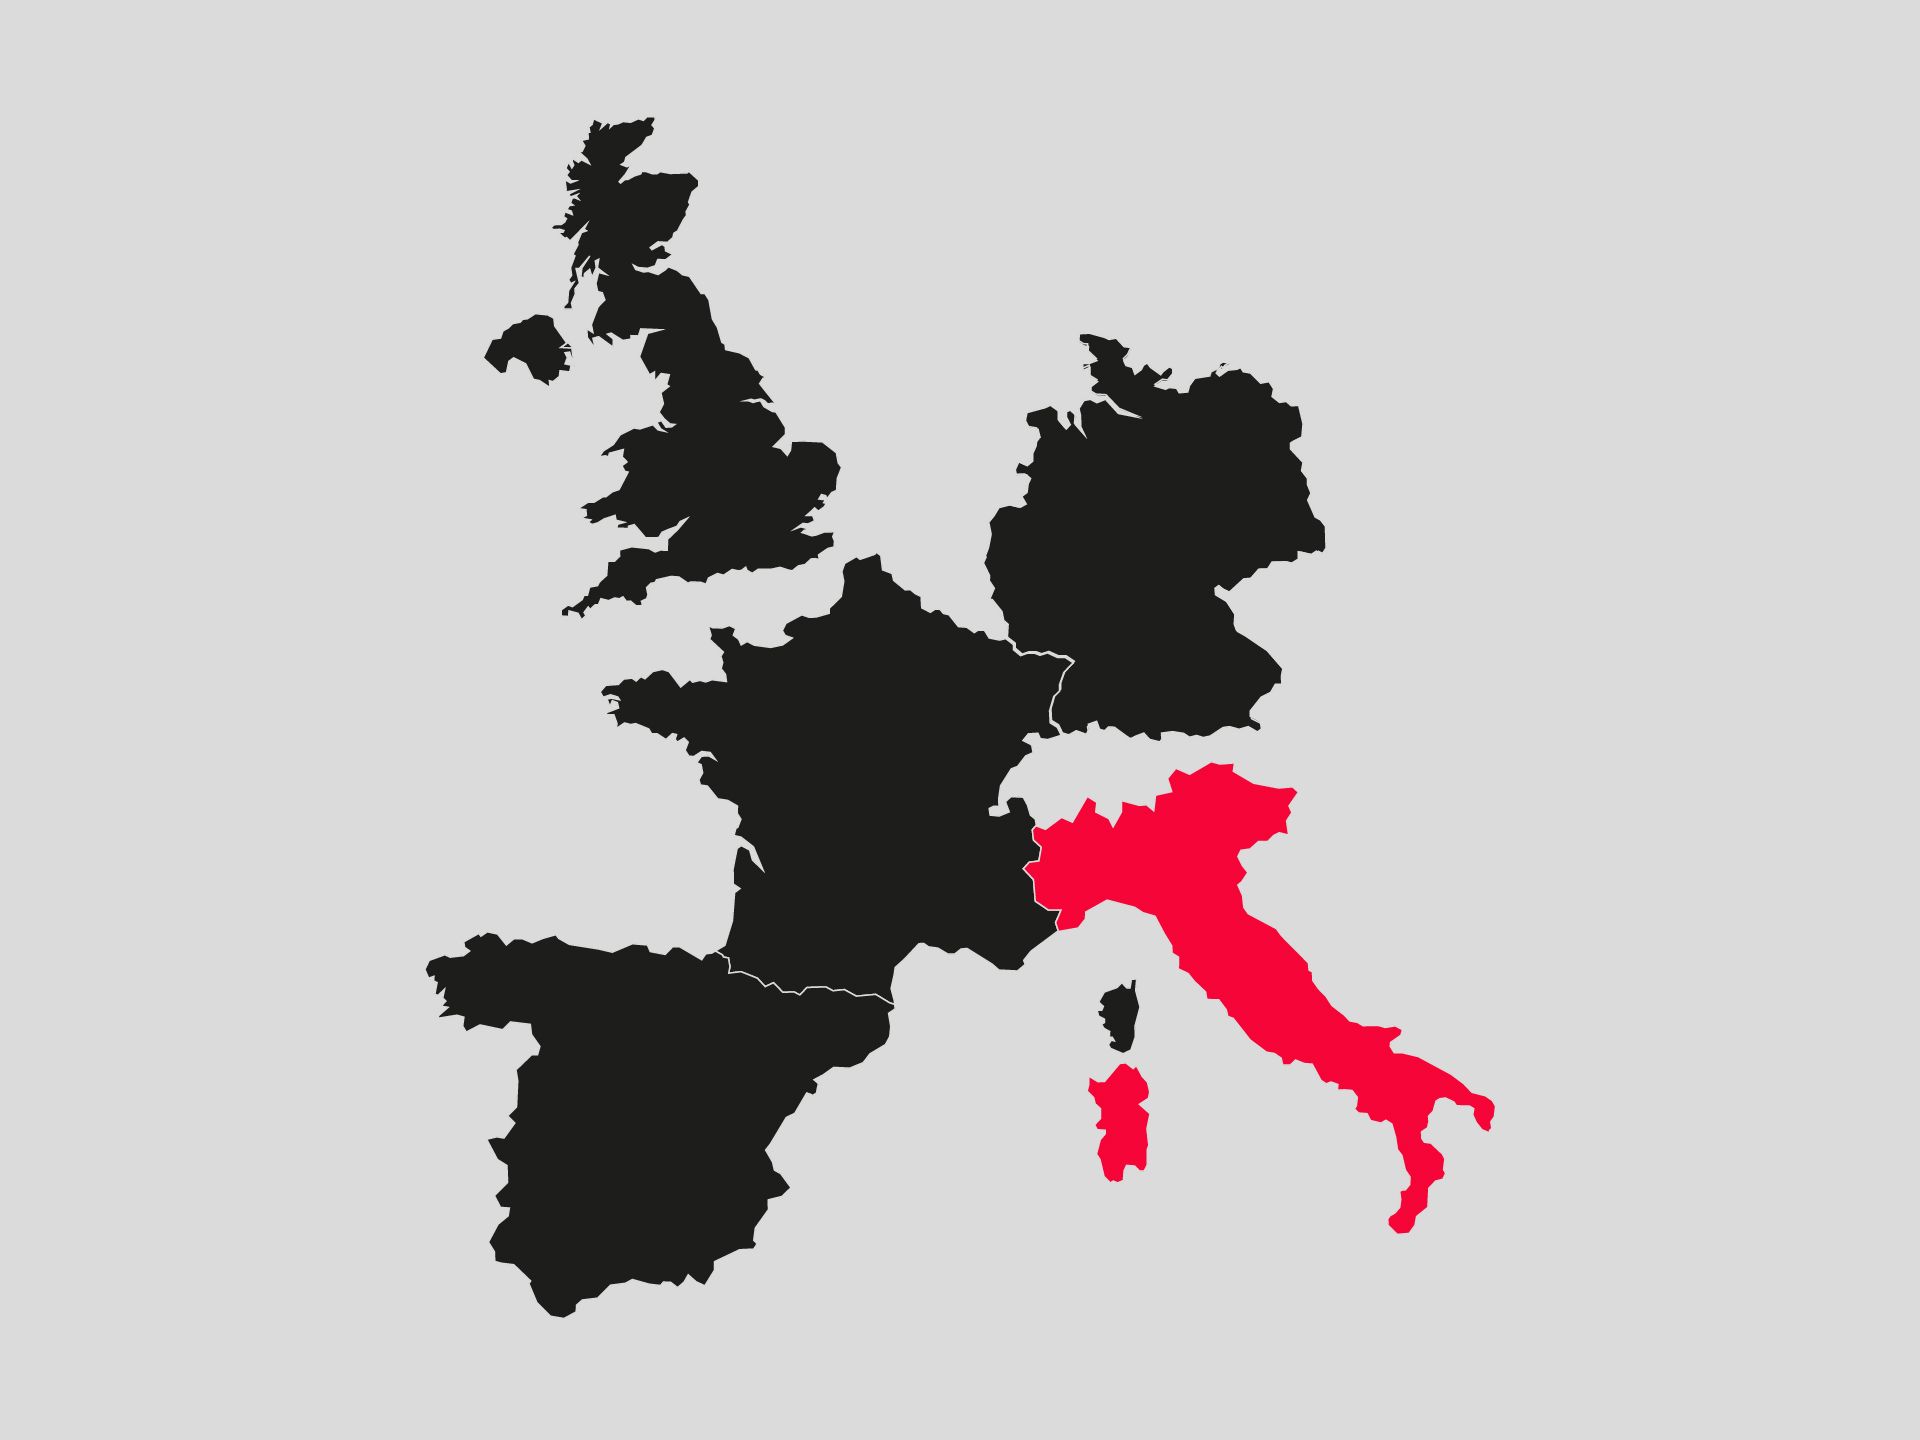 The graphic shows Europe with Italy highlighted in color.